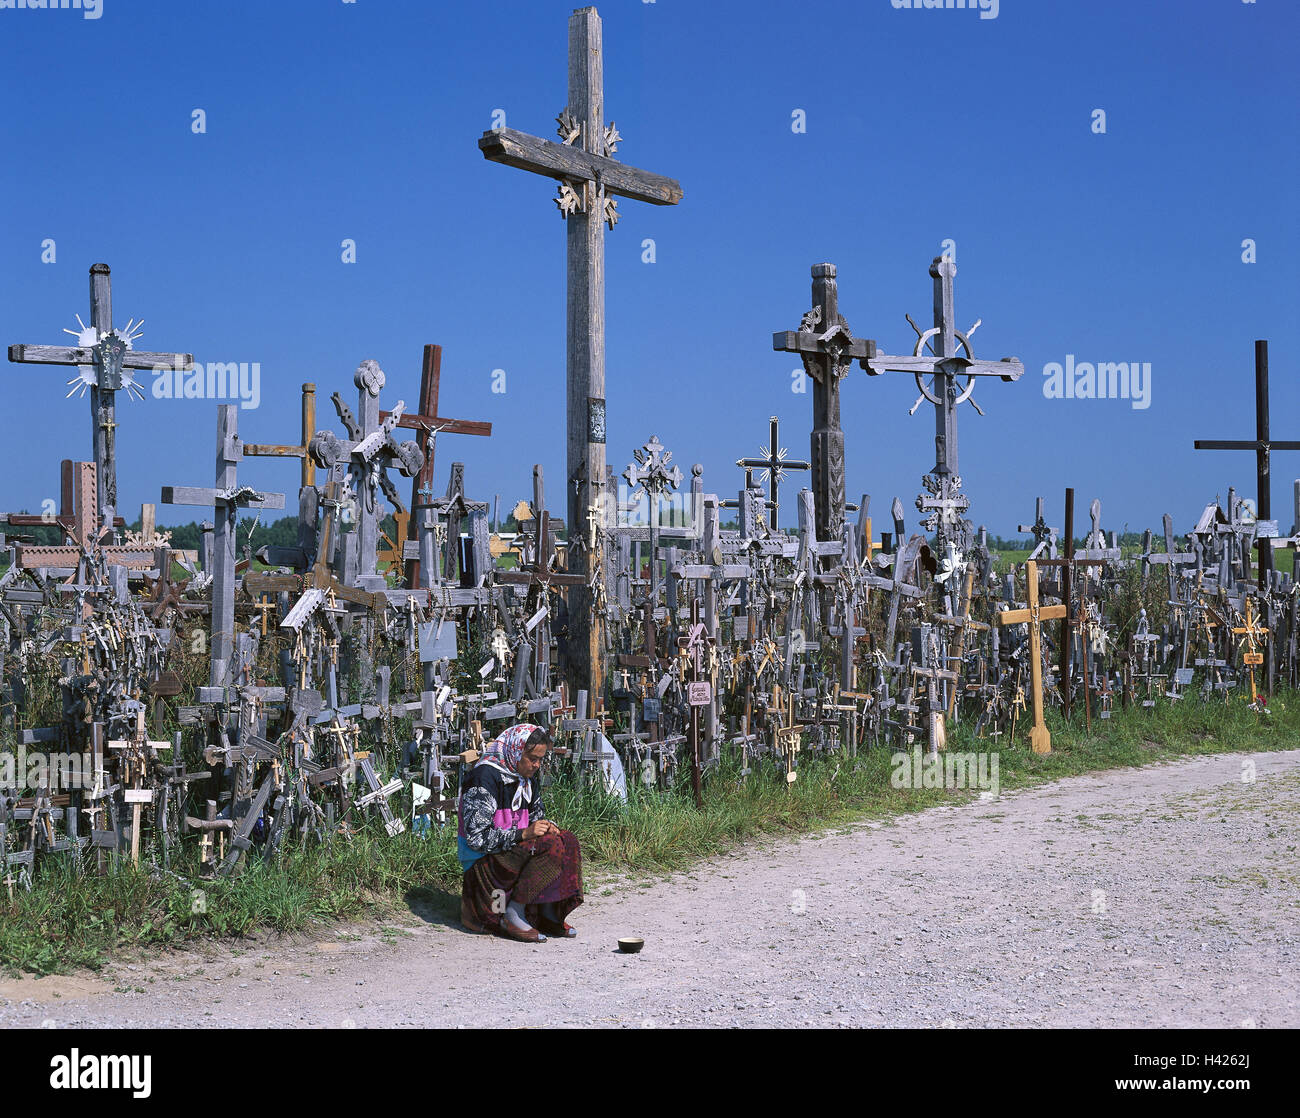 Lithuania, close Siauliai, cross mountain, Kryziu Kalnas, woman, sit, prayer, beg, no model release!, Europe, Nordosteuropa, the Baltic States, Lietuva, Lietuvos Respublika, Schaulen, Schawli, mountain the crosses, hills, shrine, national shrine, place pilgrimage, pilgrim's site, Kriziu Kalnas, pilgrim's crosses, wooden crosses, crucifixes, rosaries, offering, contributions, offerings, carving, national icon, hope, faith, religion, Christianity, place of interest, landmark, headgear, headscarf, humility, devotion, poverty, dished plate Stock Photo